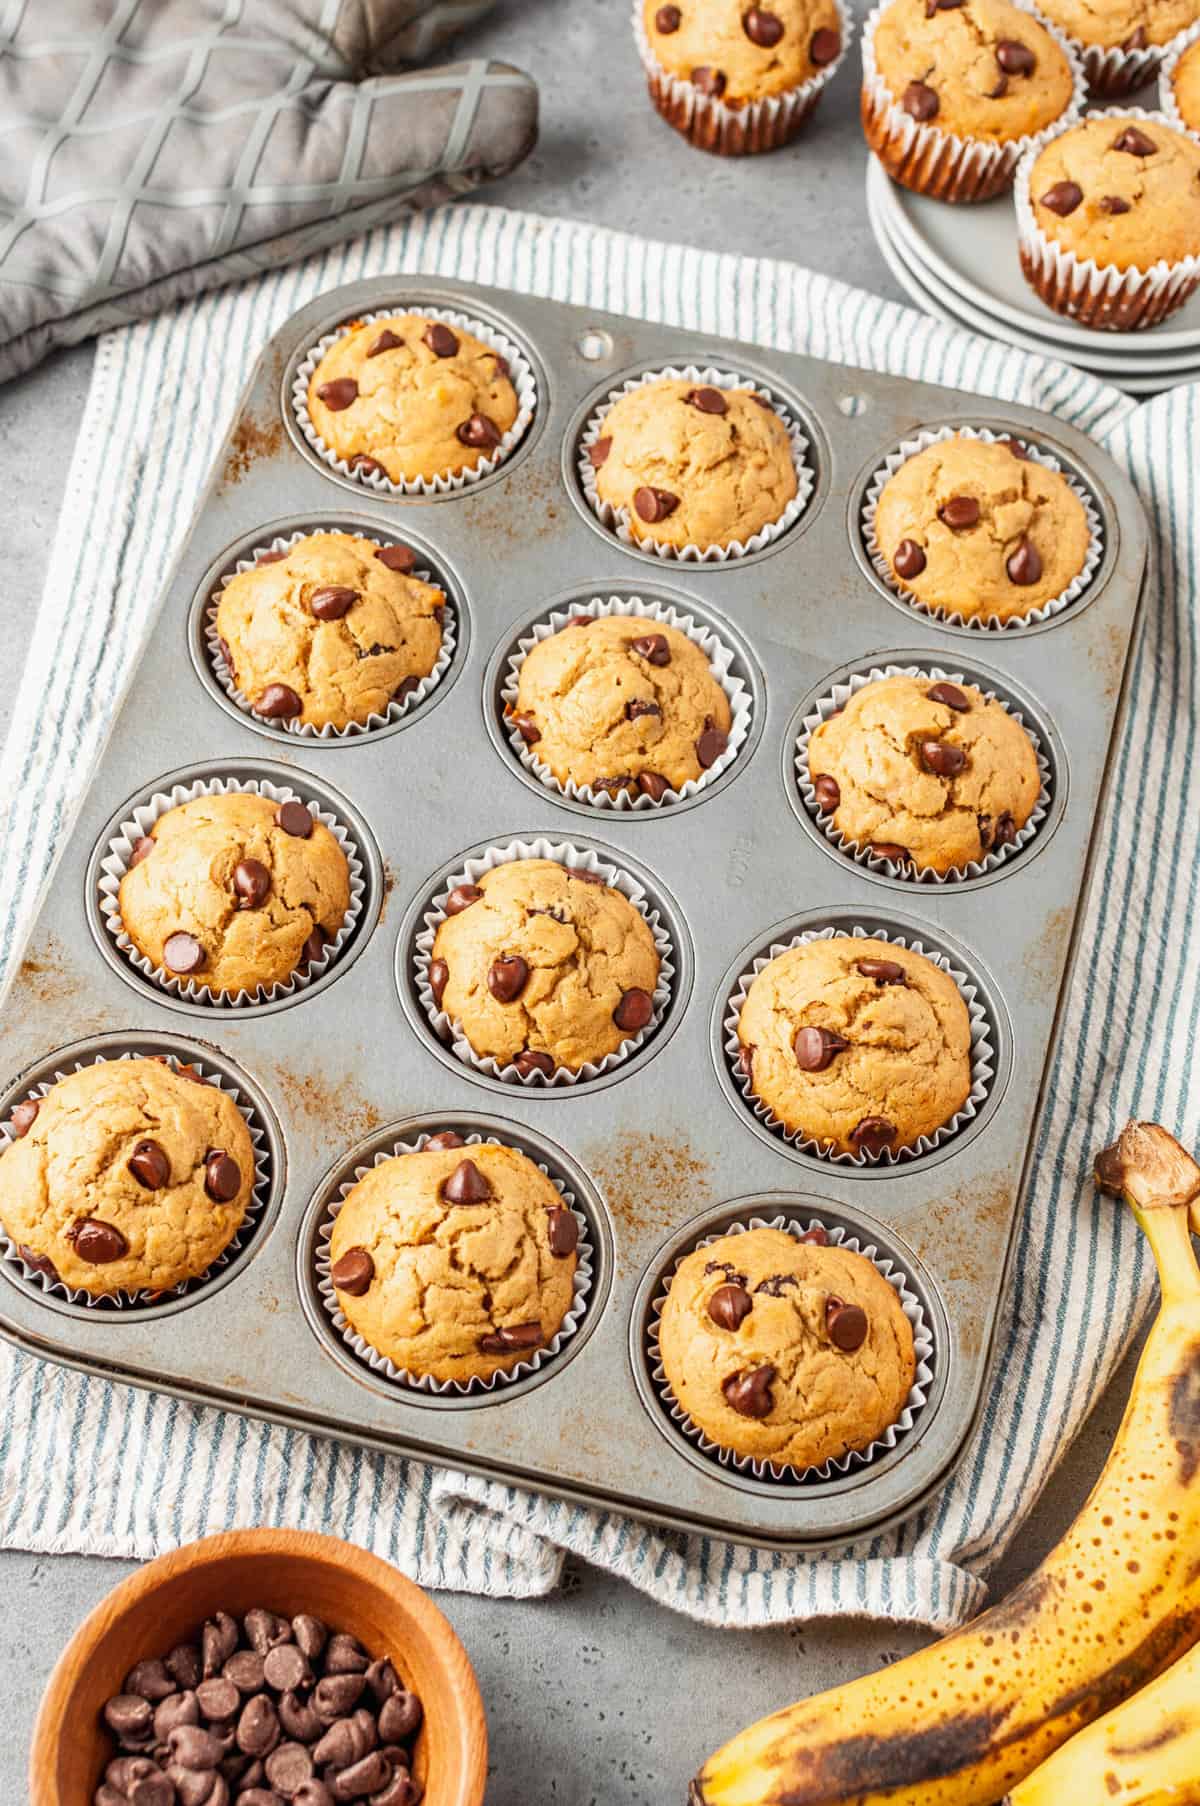 12 count muffin tin with baked peanut butter banana muffins